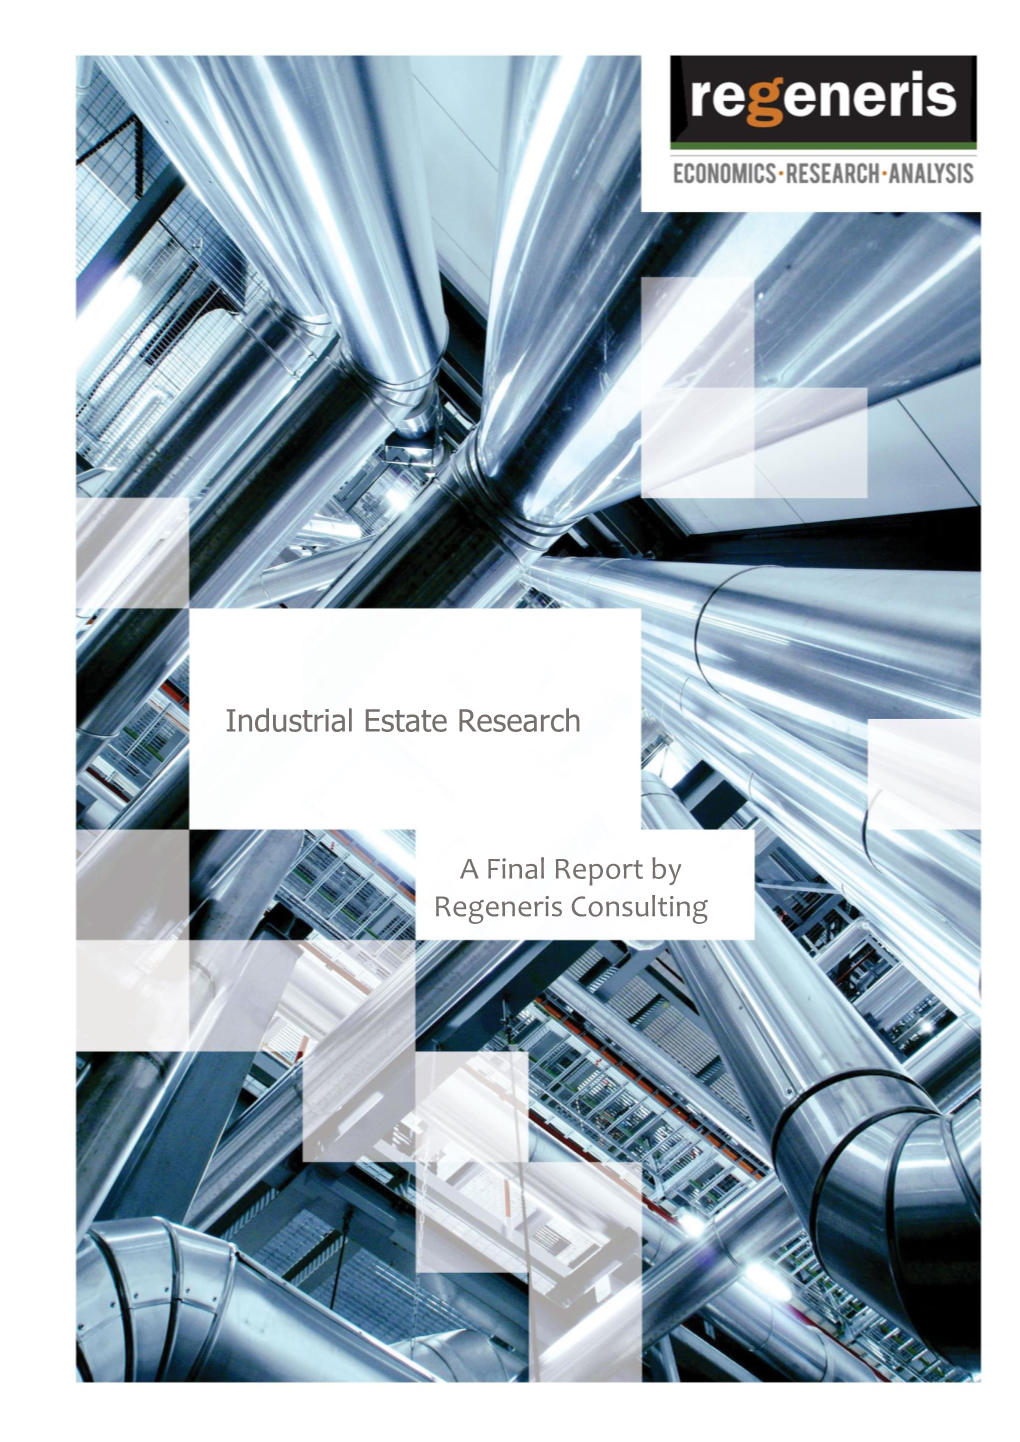 Industrial Estate Research a Final Report by Regeneris Consulting